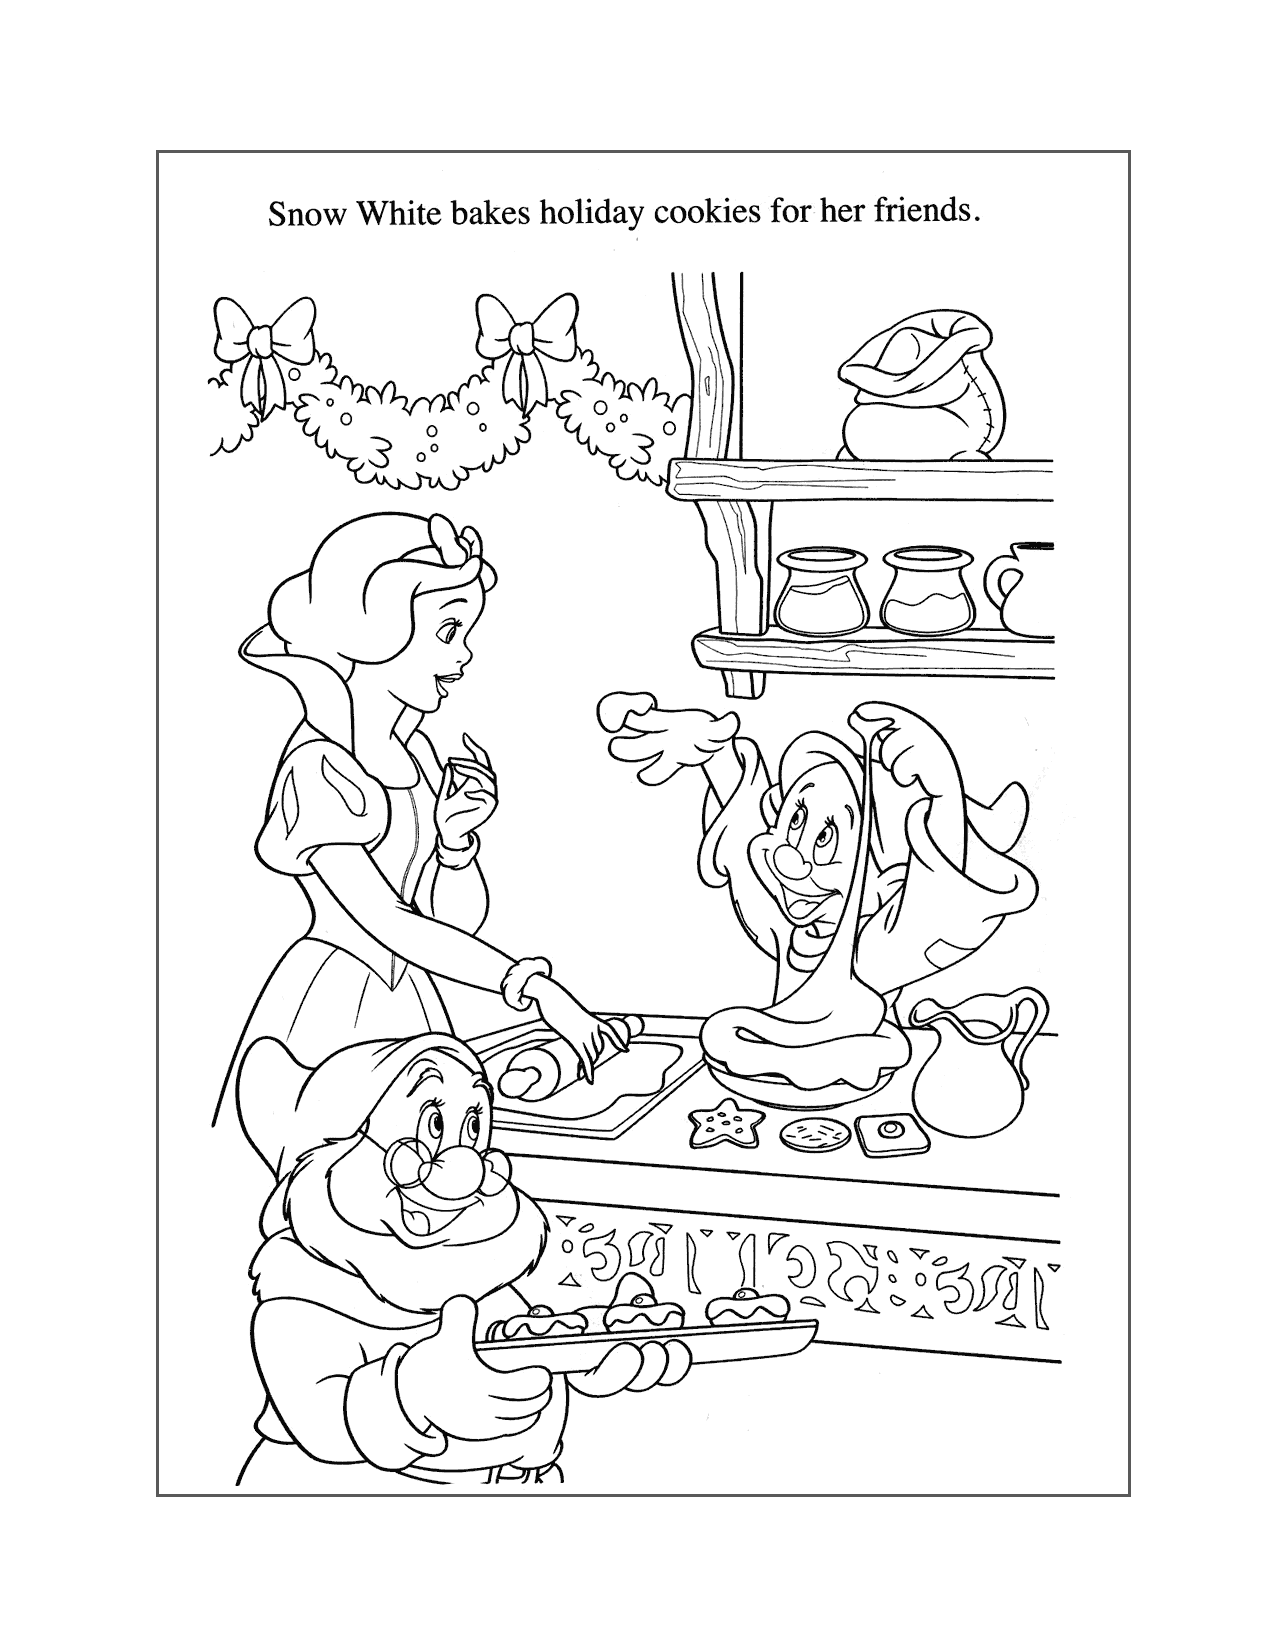 Snow White Bakes Christmas Cookies Coloring Page